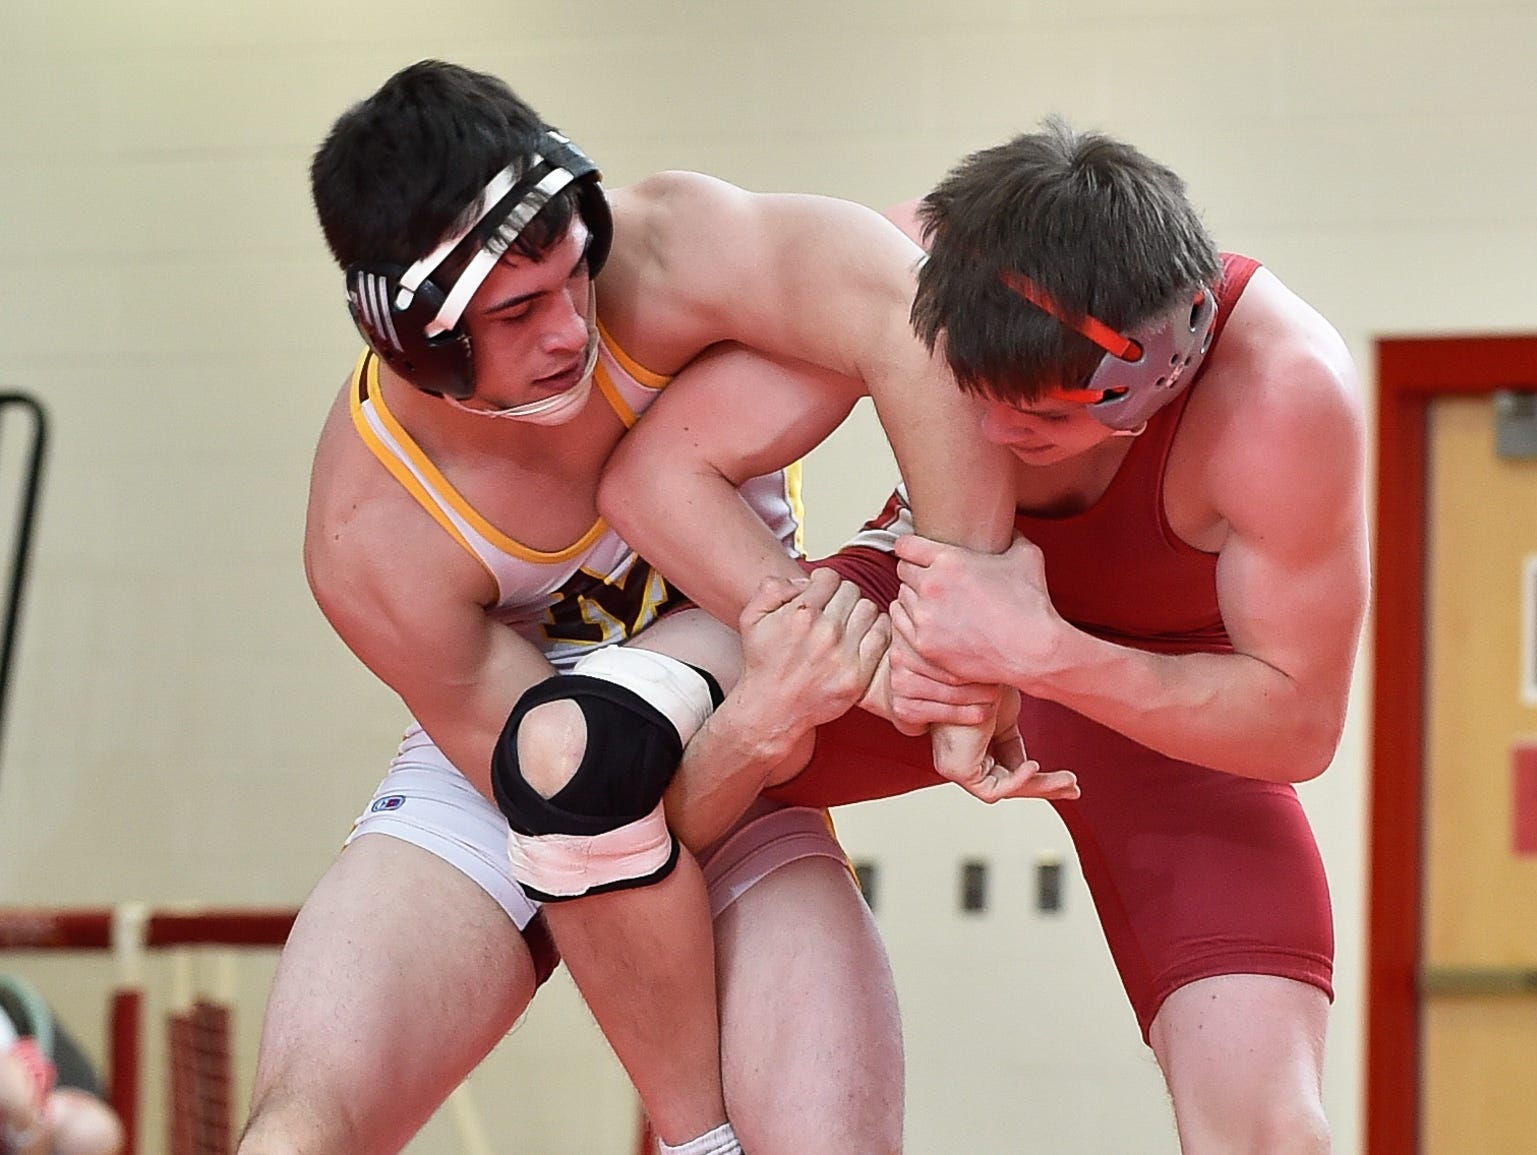 Milford's Barton Dalious, left and Smyrna's Tanner Mullen in the 145 pound match at Smyrna High School.